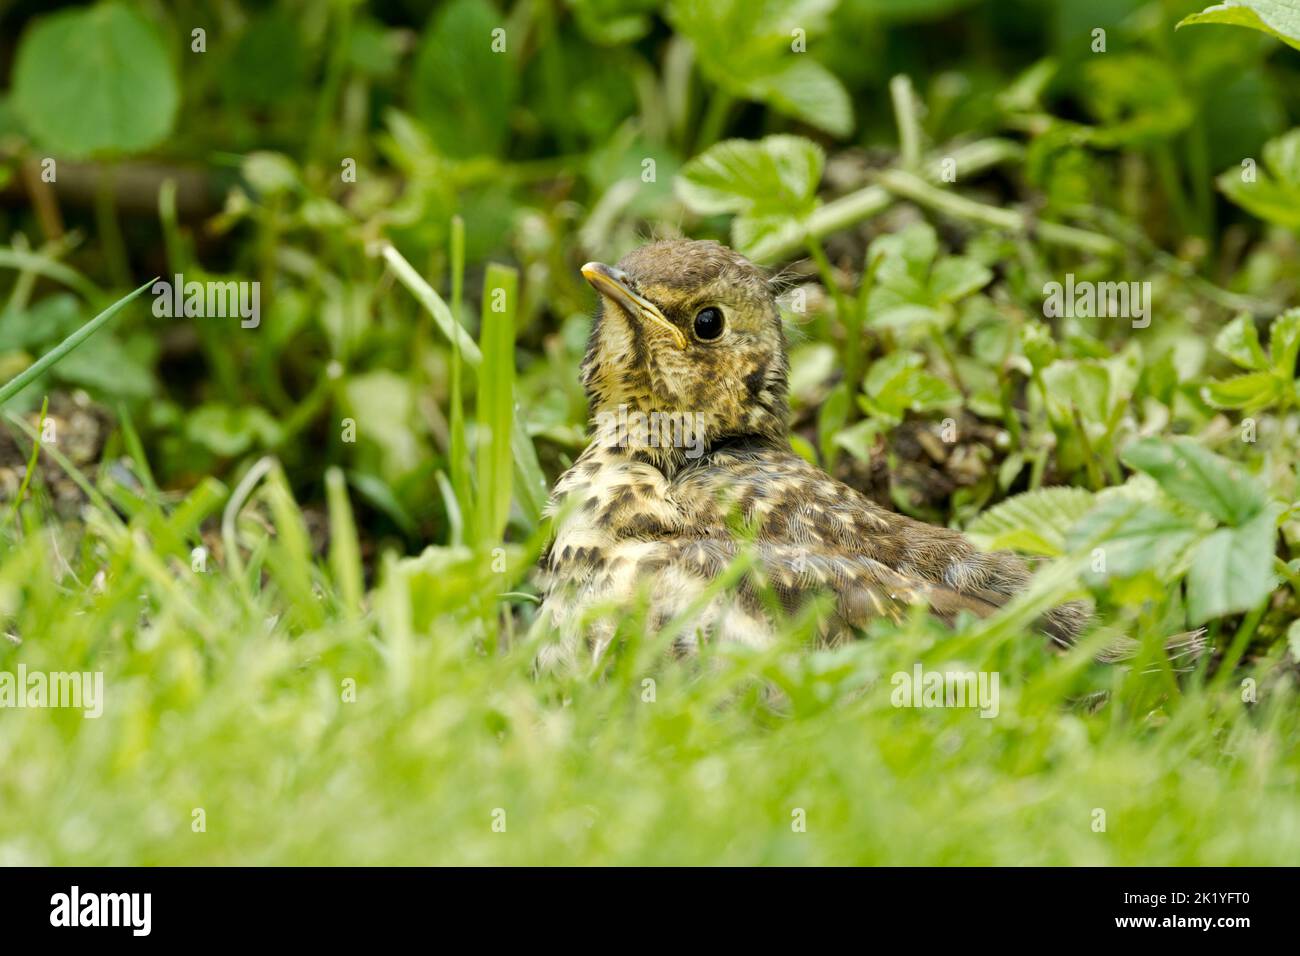 Young song thrush (Turdus philomelos) sunbathing among grass and other vegetation in a rural garden. Stock Photo